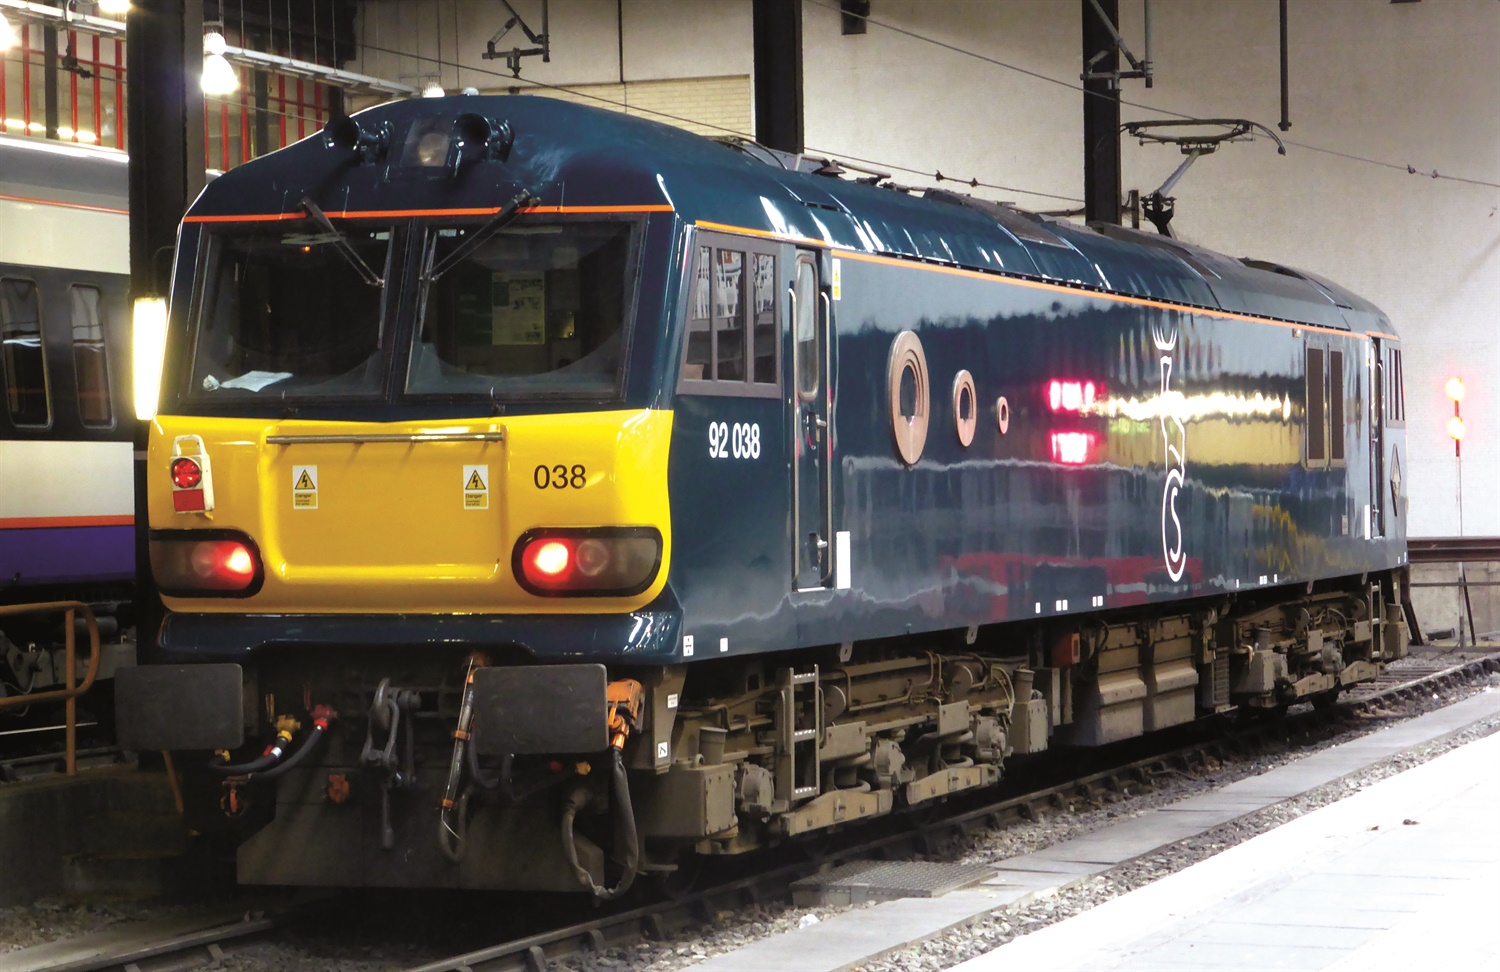 Caledonian sleeper: Poor performance figures and the role of new loco's